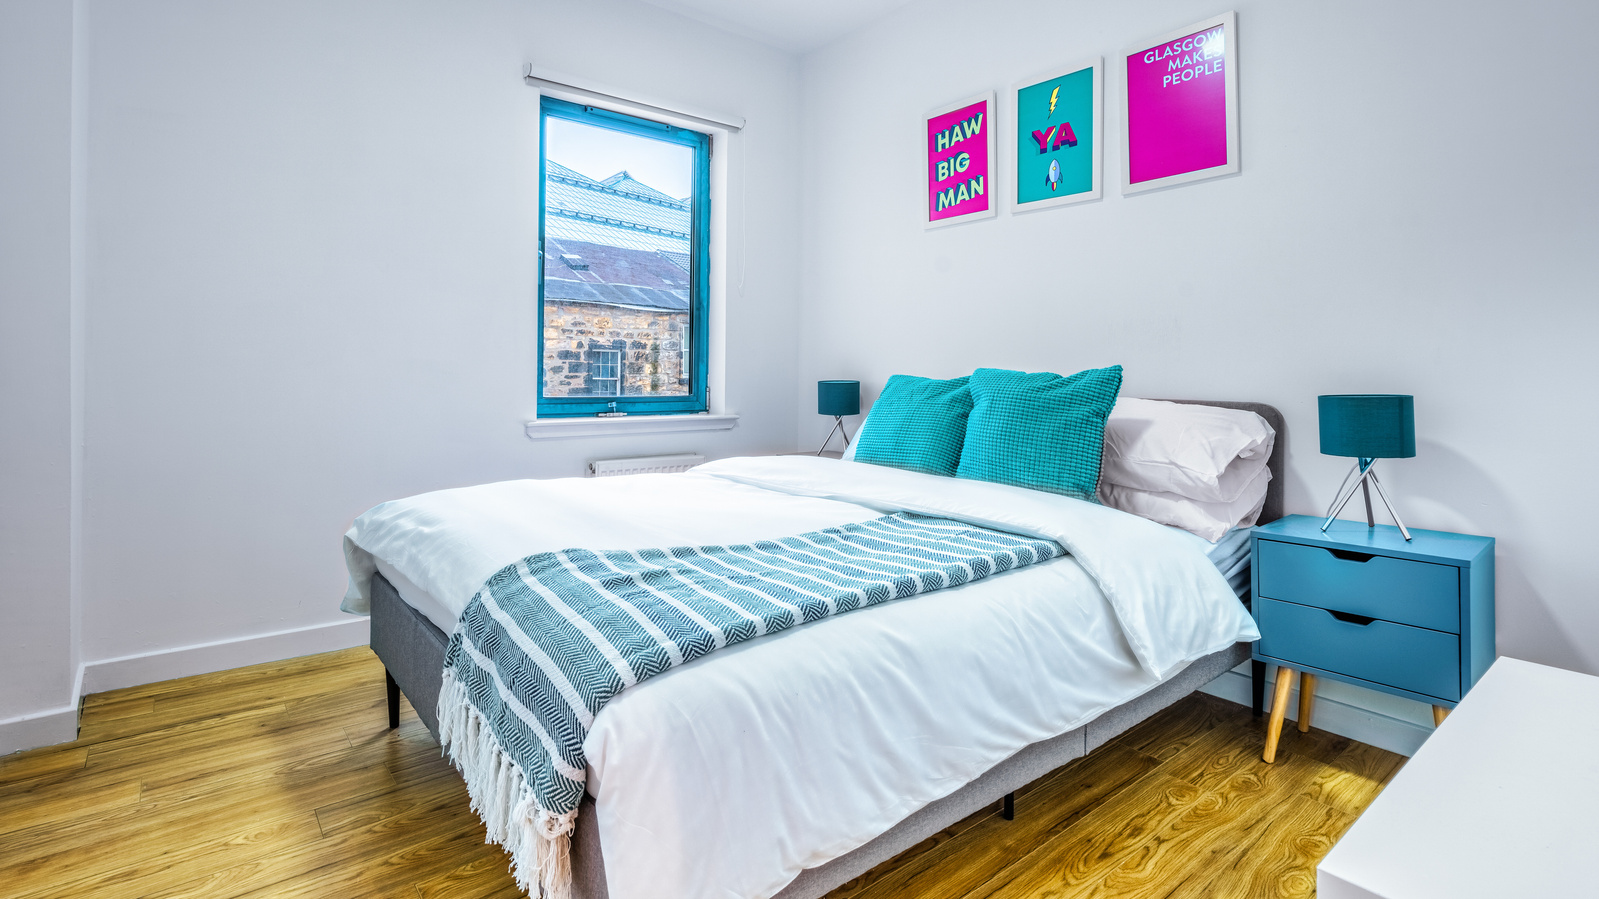 Bedroom for Scotland Interior Property in Glasgow - Photography by Nate Cleary